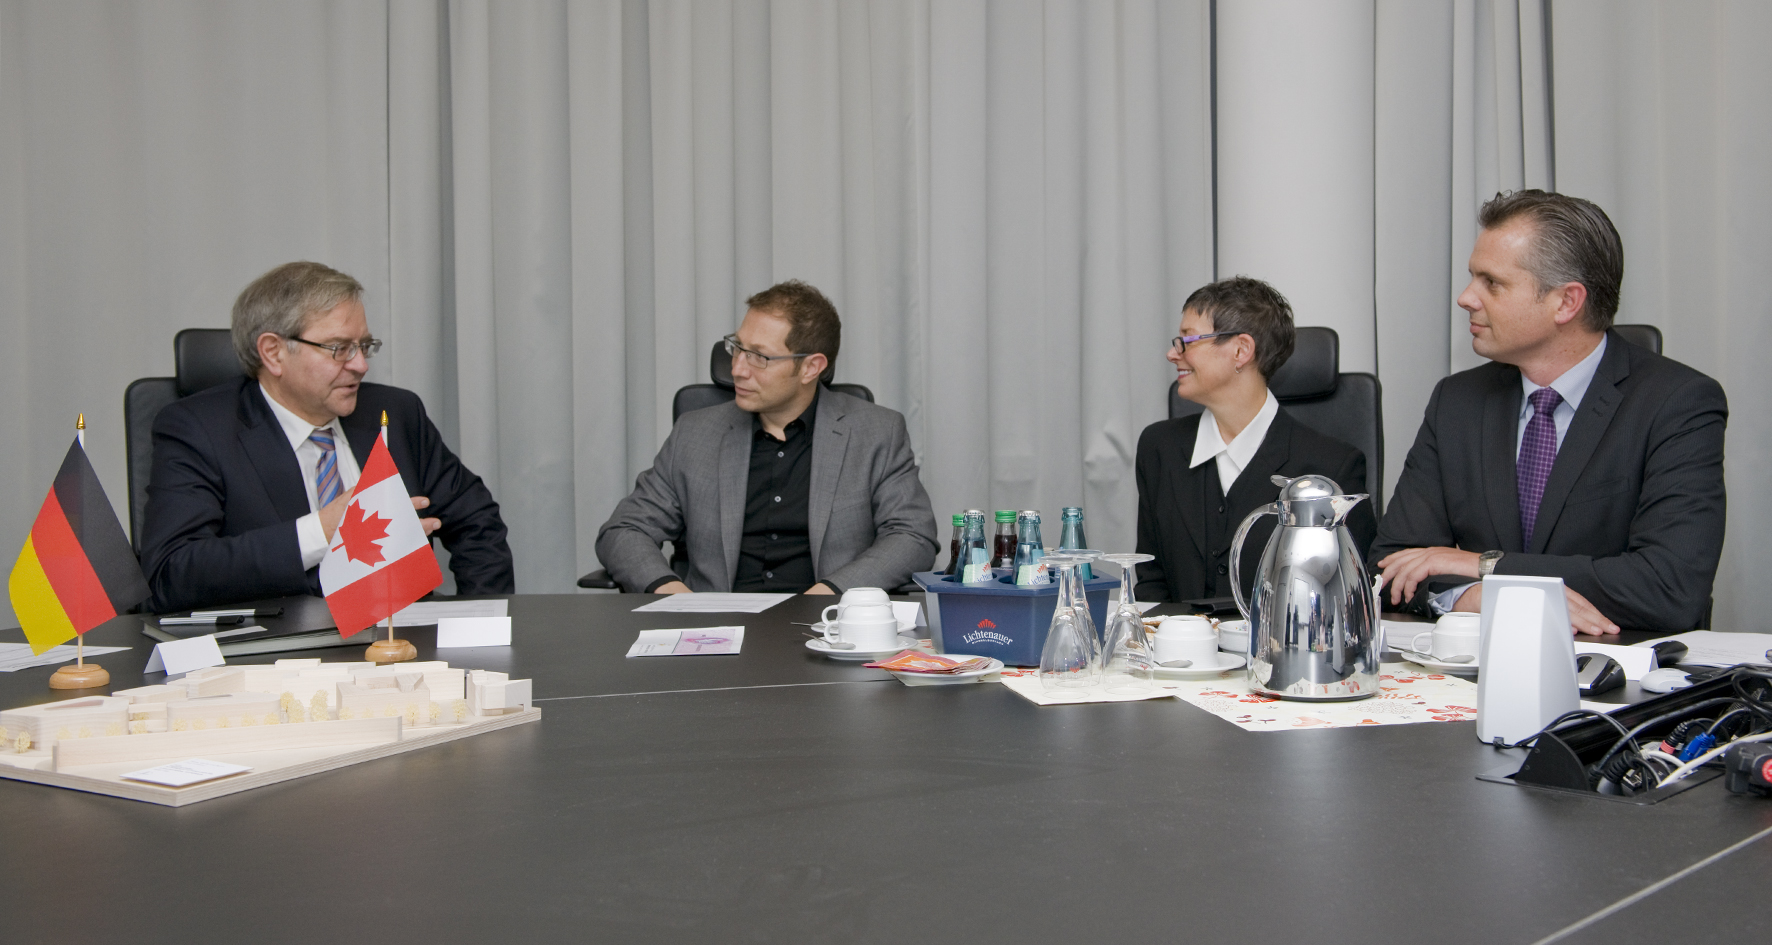 (from left) Prof. Dr. Frank Emmrich, Director of the Fraunhofer IZI; Prof. Dr. Jonathan Bramson, Director of the McMaster Immunology Research Centre; Dr. Jennifer Decker, Counsellor Science and Technology, Embassy of Canada in Berlin; Mark Schroeter, Second Secretary, Embassy of Canada in Berlin.